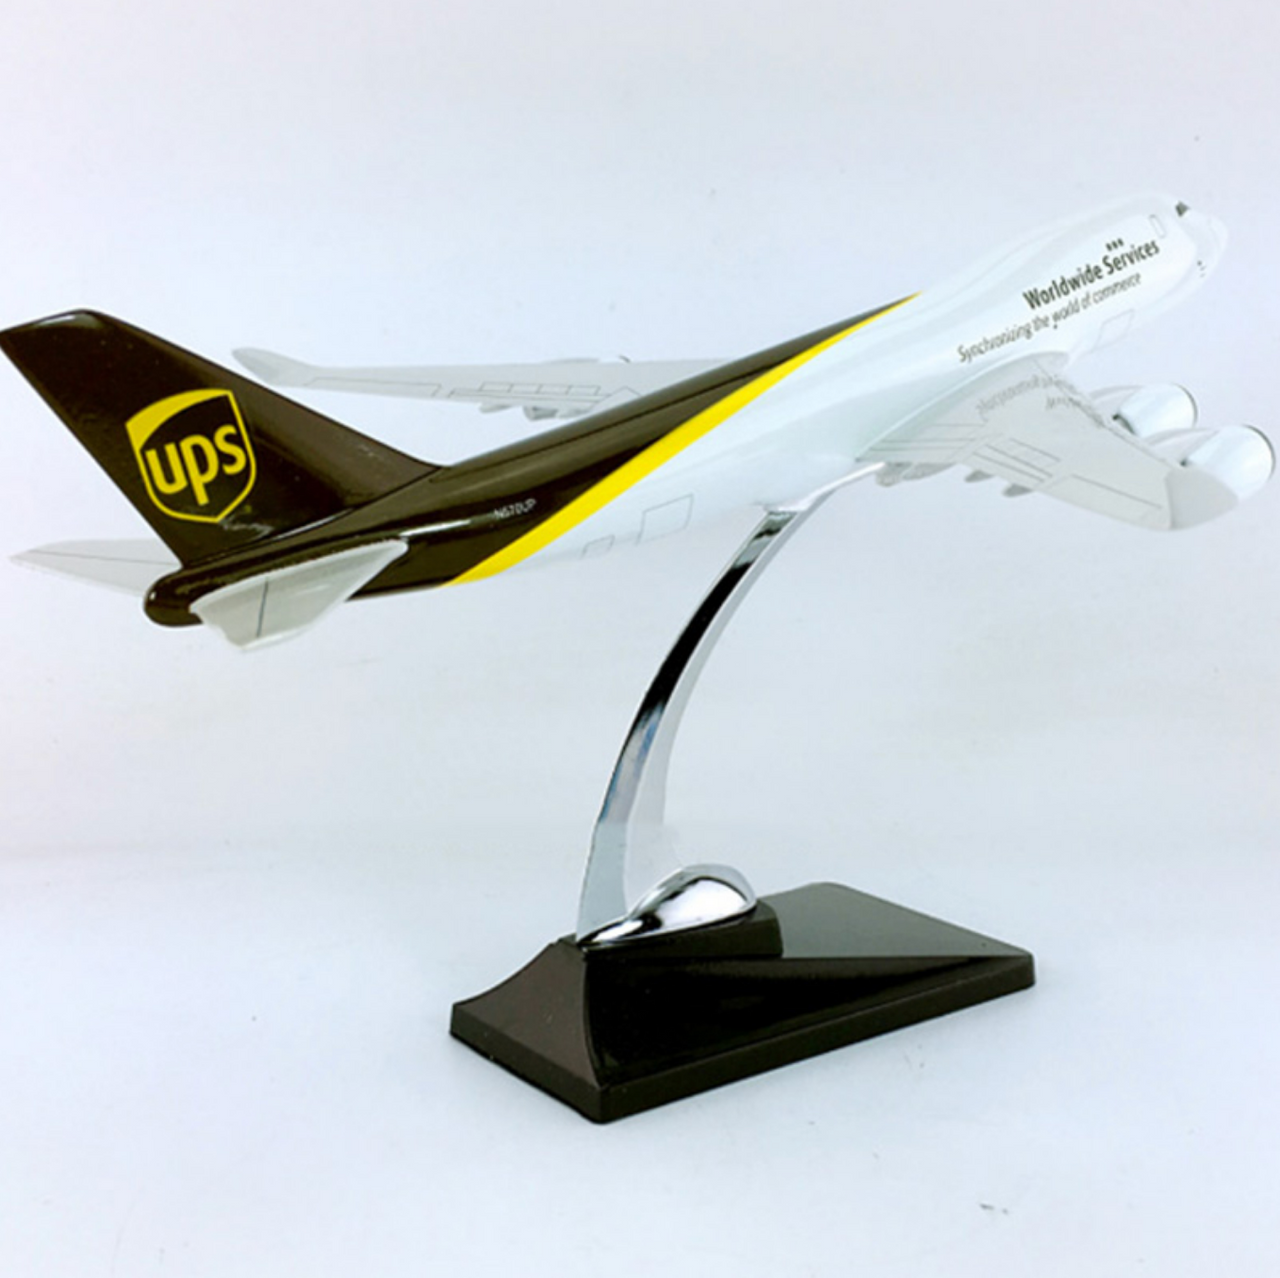 UPS Cargo Boeing 747 (Special Edition 36CM) Airplane Model